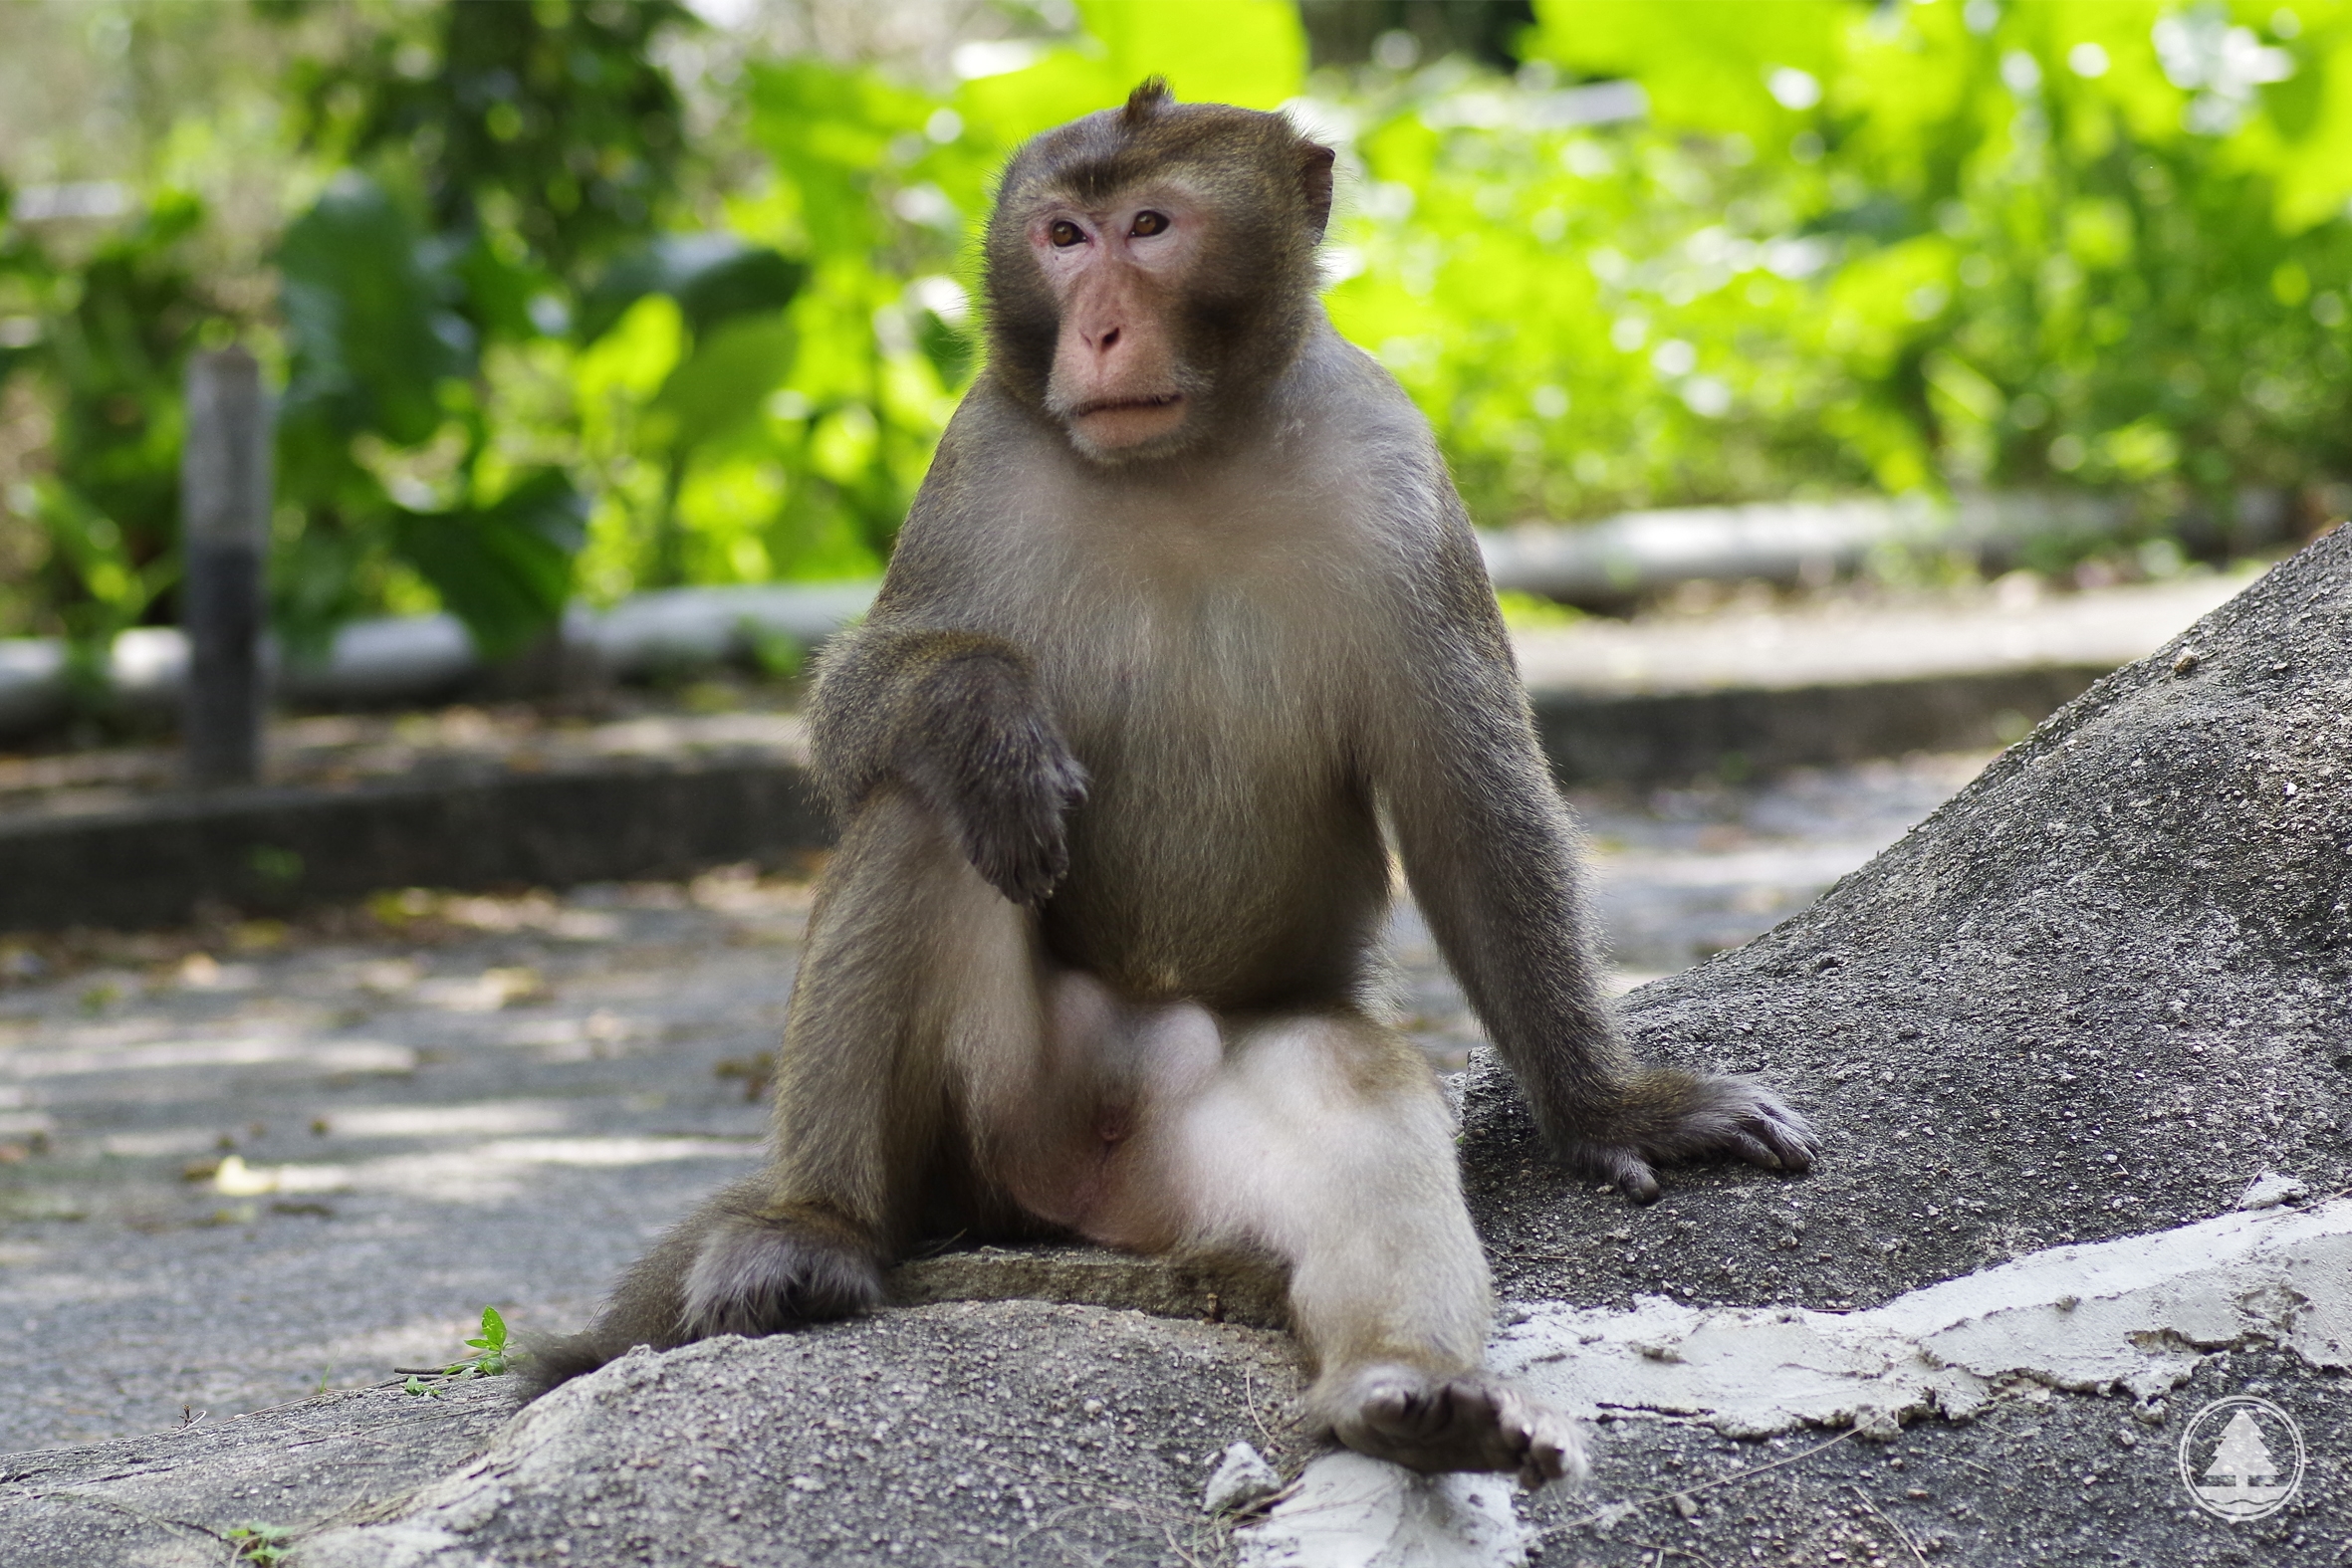 Hybrid of the Rhesus Macaque and Longtailed Macaque